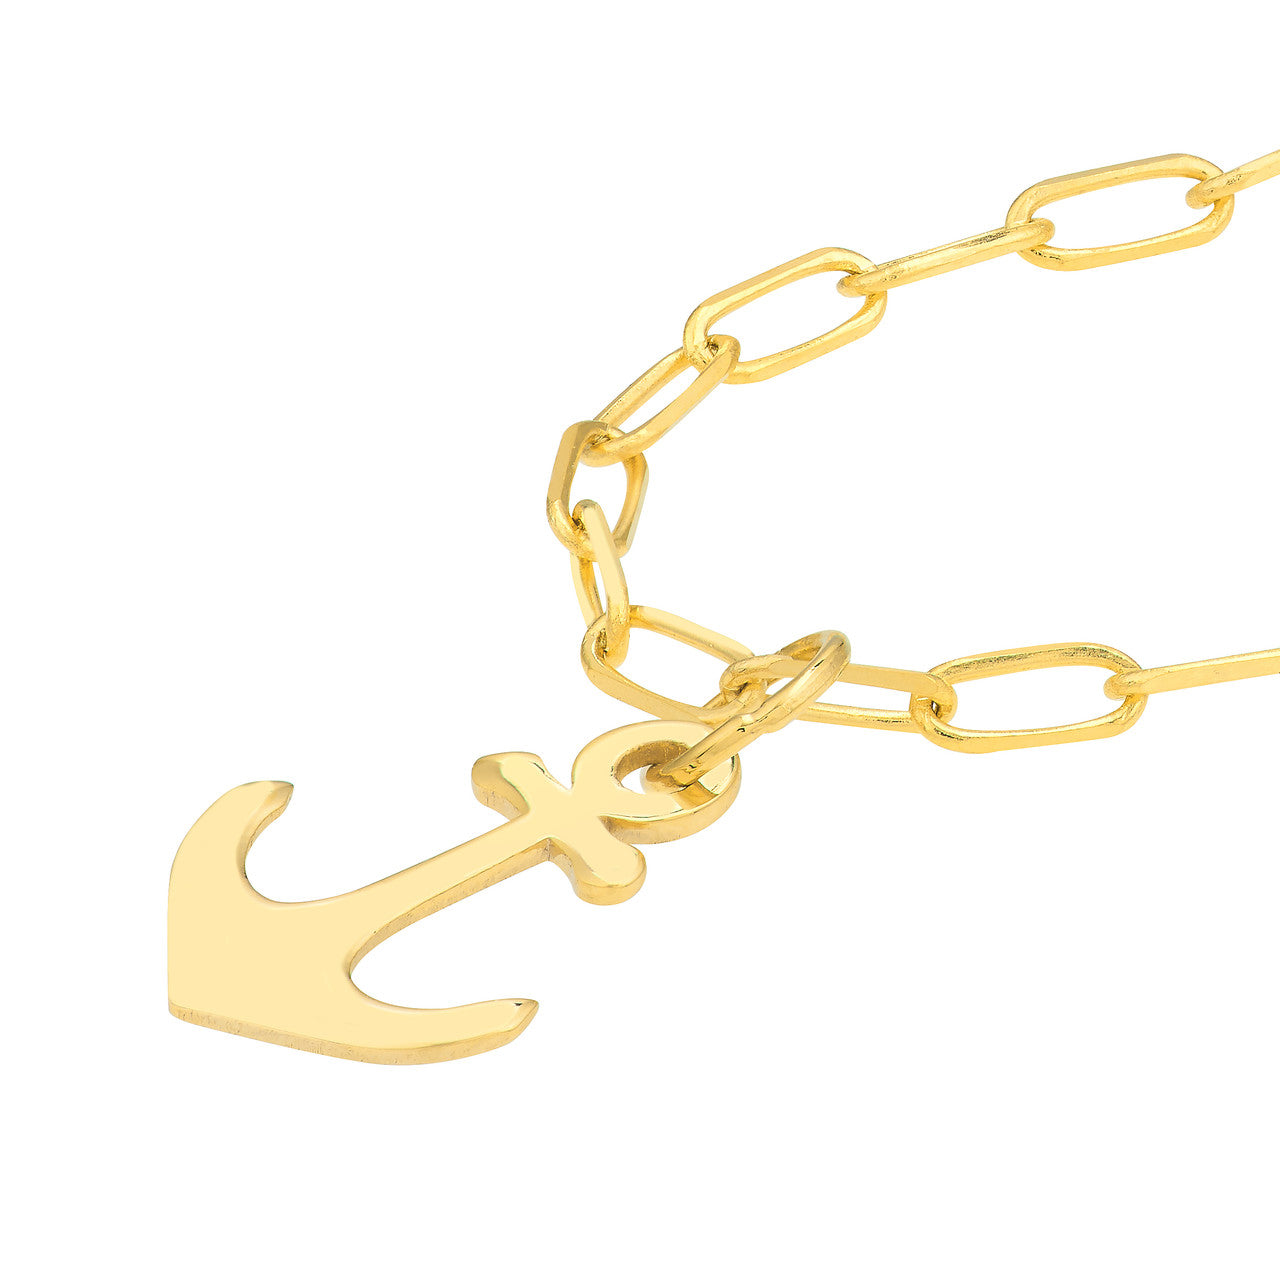 14K Yellow Gold Mini Anchor Paper Clip Chain Necklace